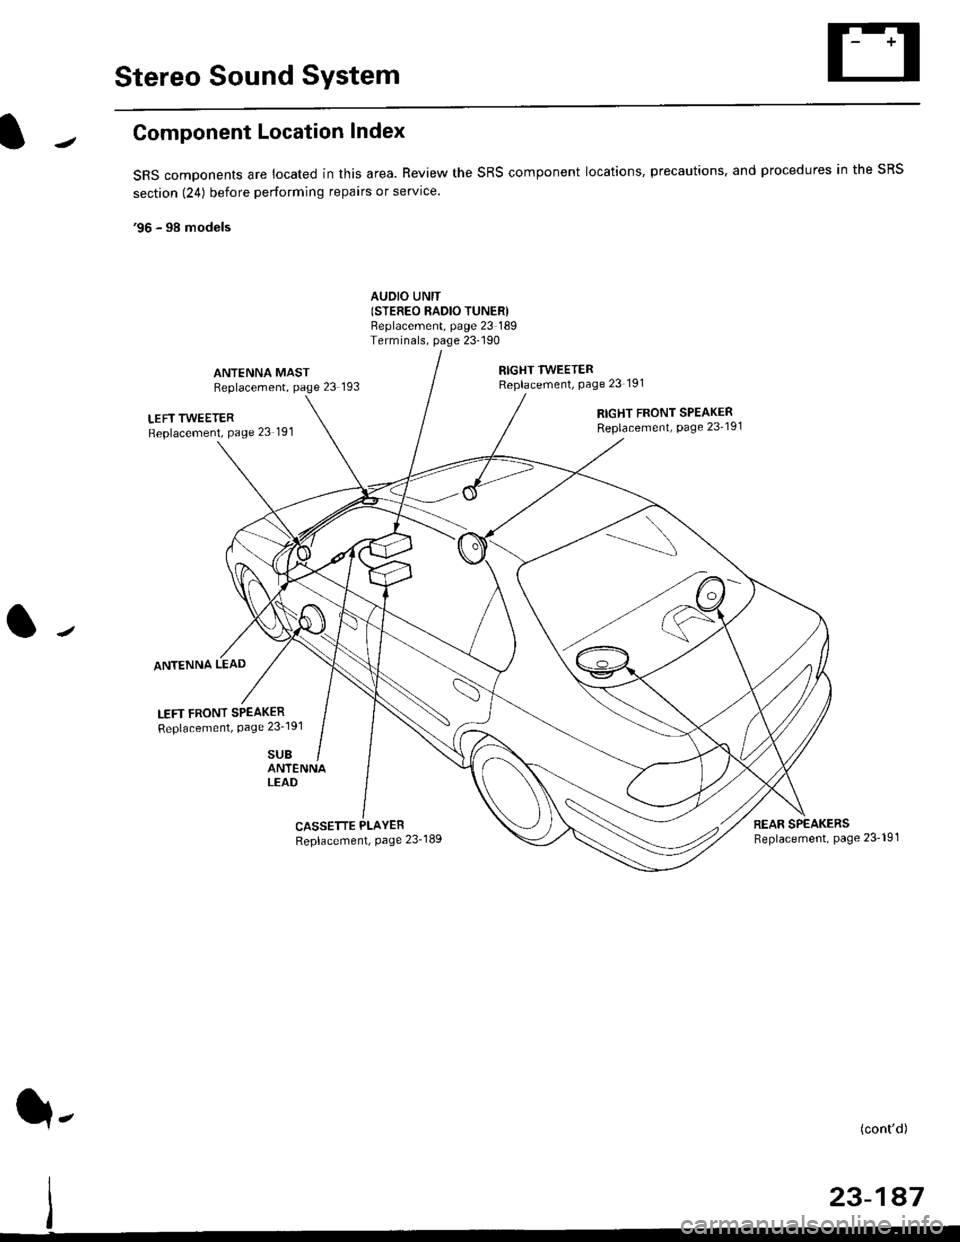 HONDA CIVIC 1999 6.G Workshop Manual Stereo Sound System
Component Location Index
SRS components are located in this area. Review the SRS component locations, precautions. and procedures in the SRS
section (24) before performing repairs 